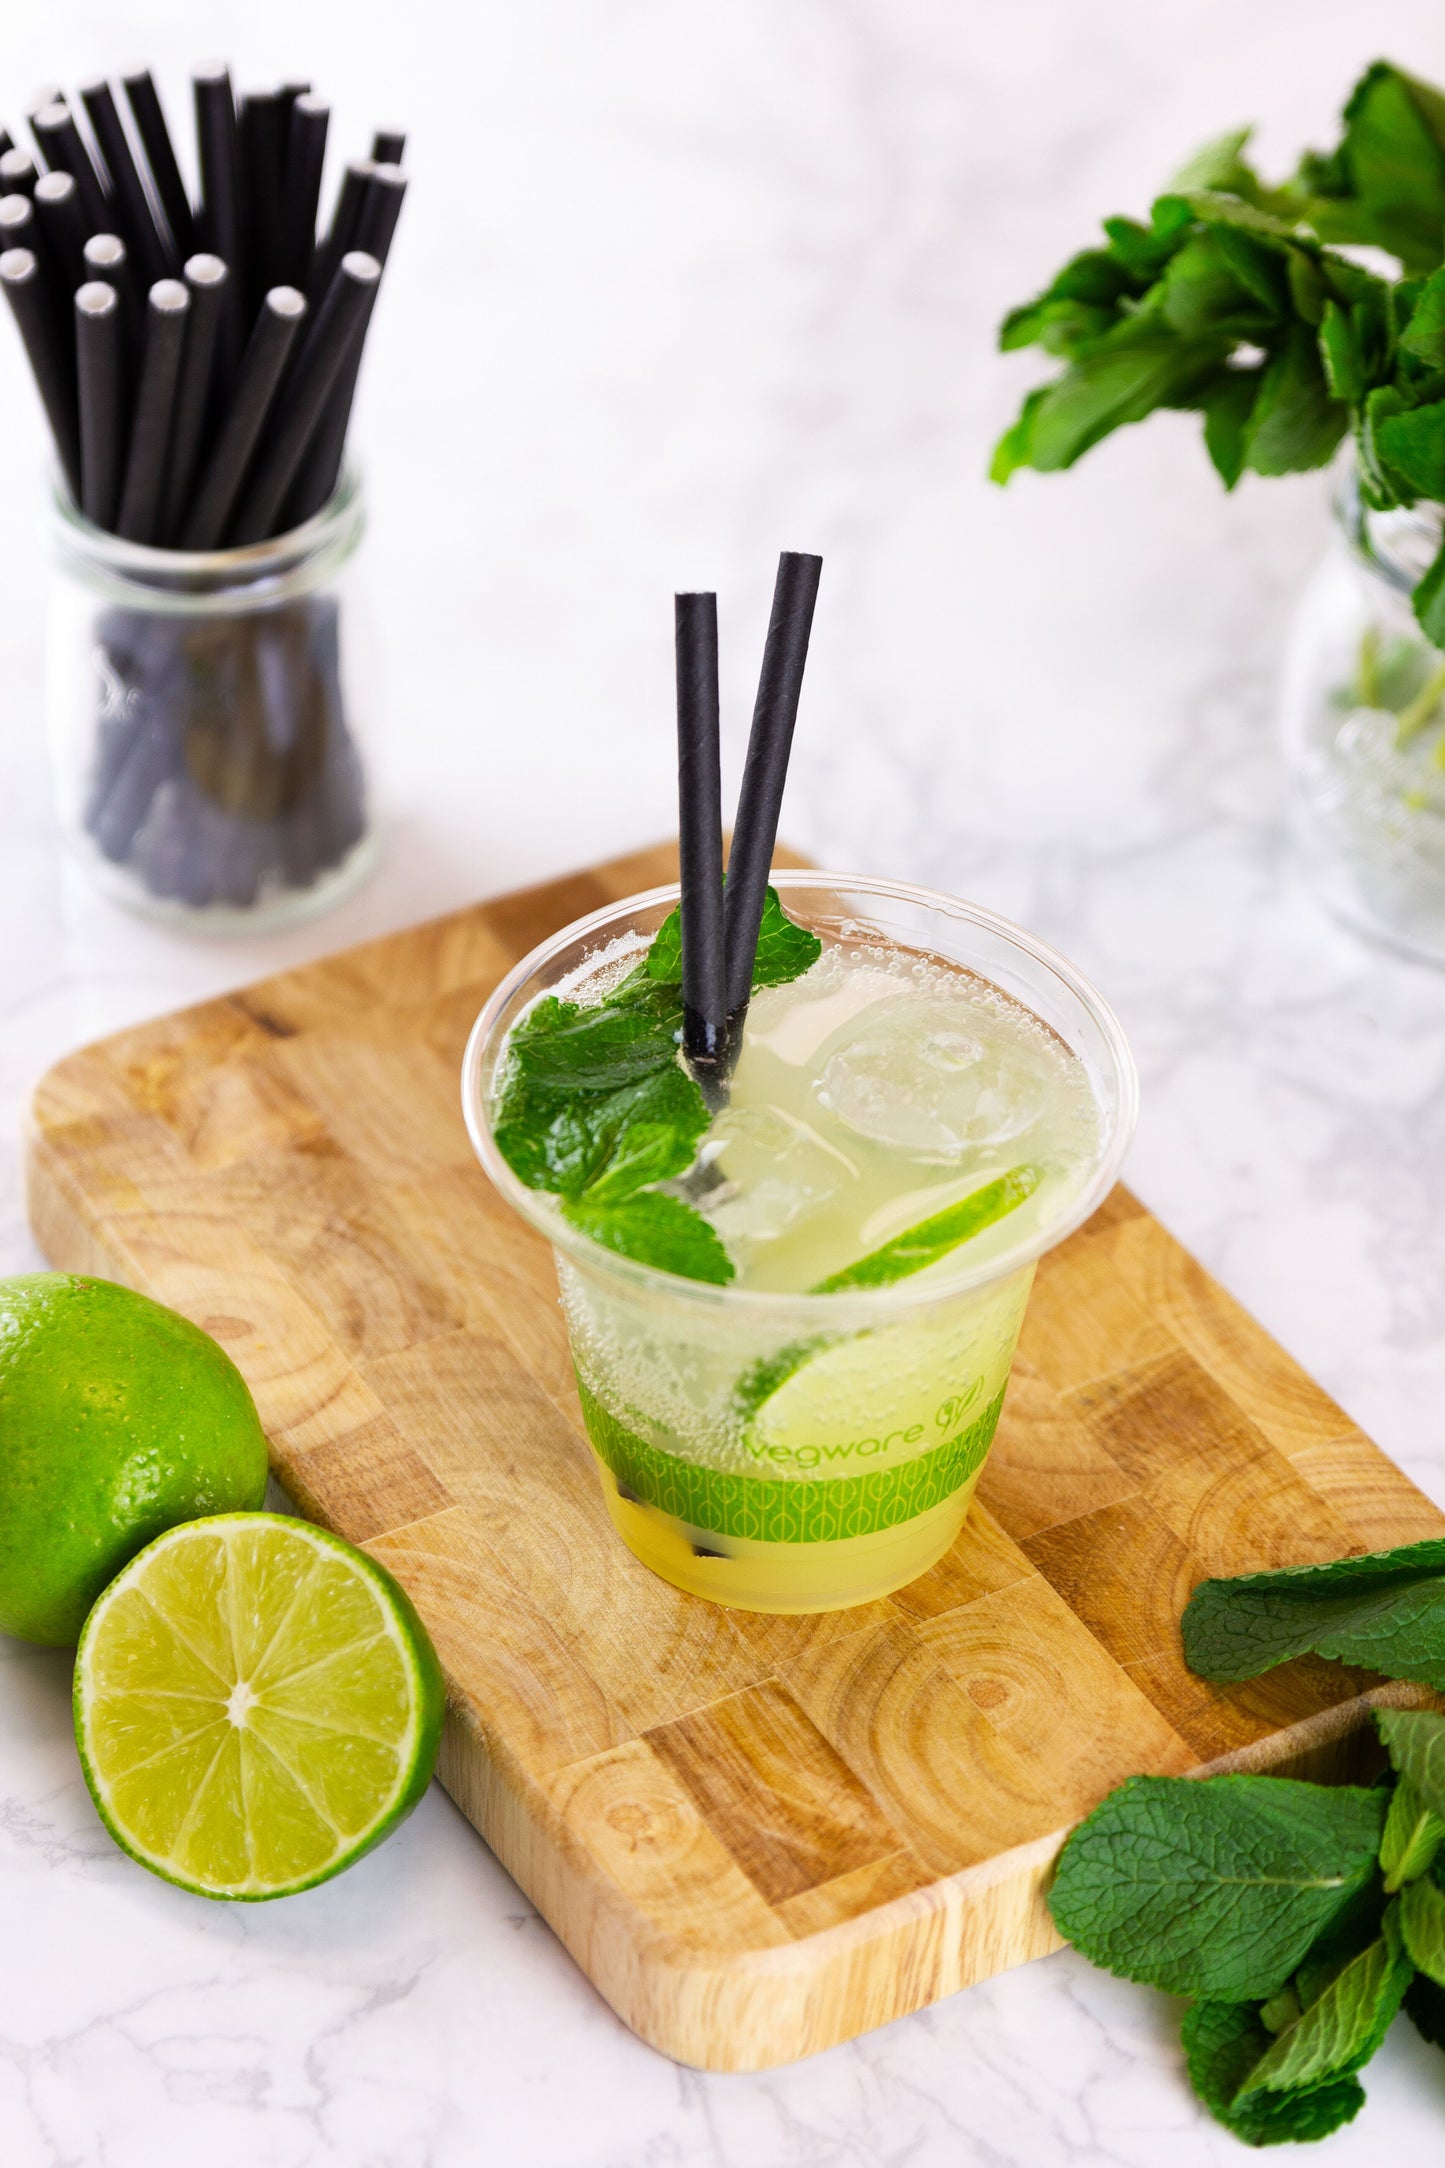 Made from sustainable FSC/SFI premium paper, these Vegware™ 7.8-inch/6mm black highball paper straws are commercially compostable and designed to last for hours in cold drinks.